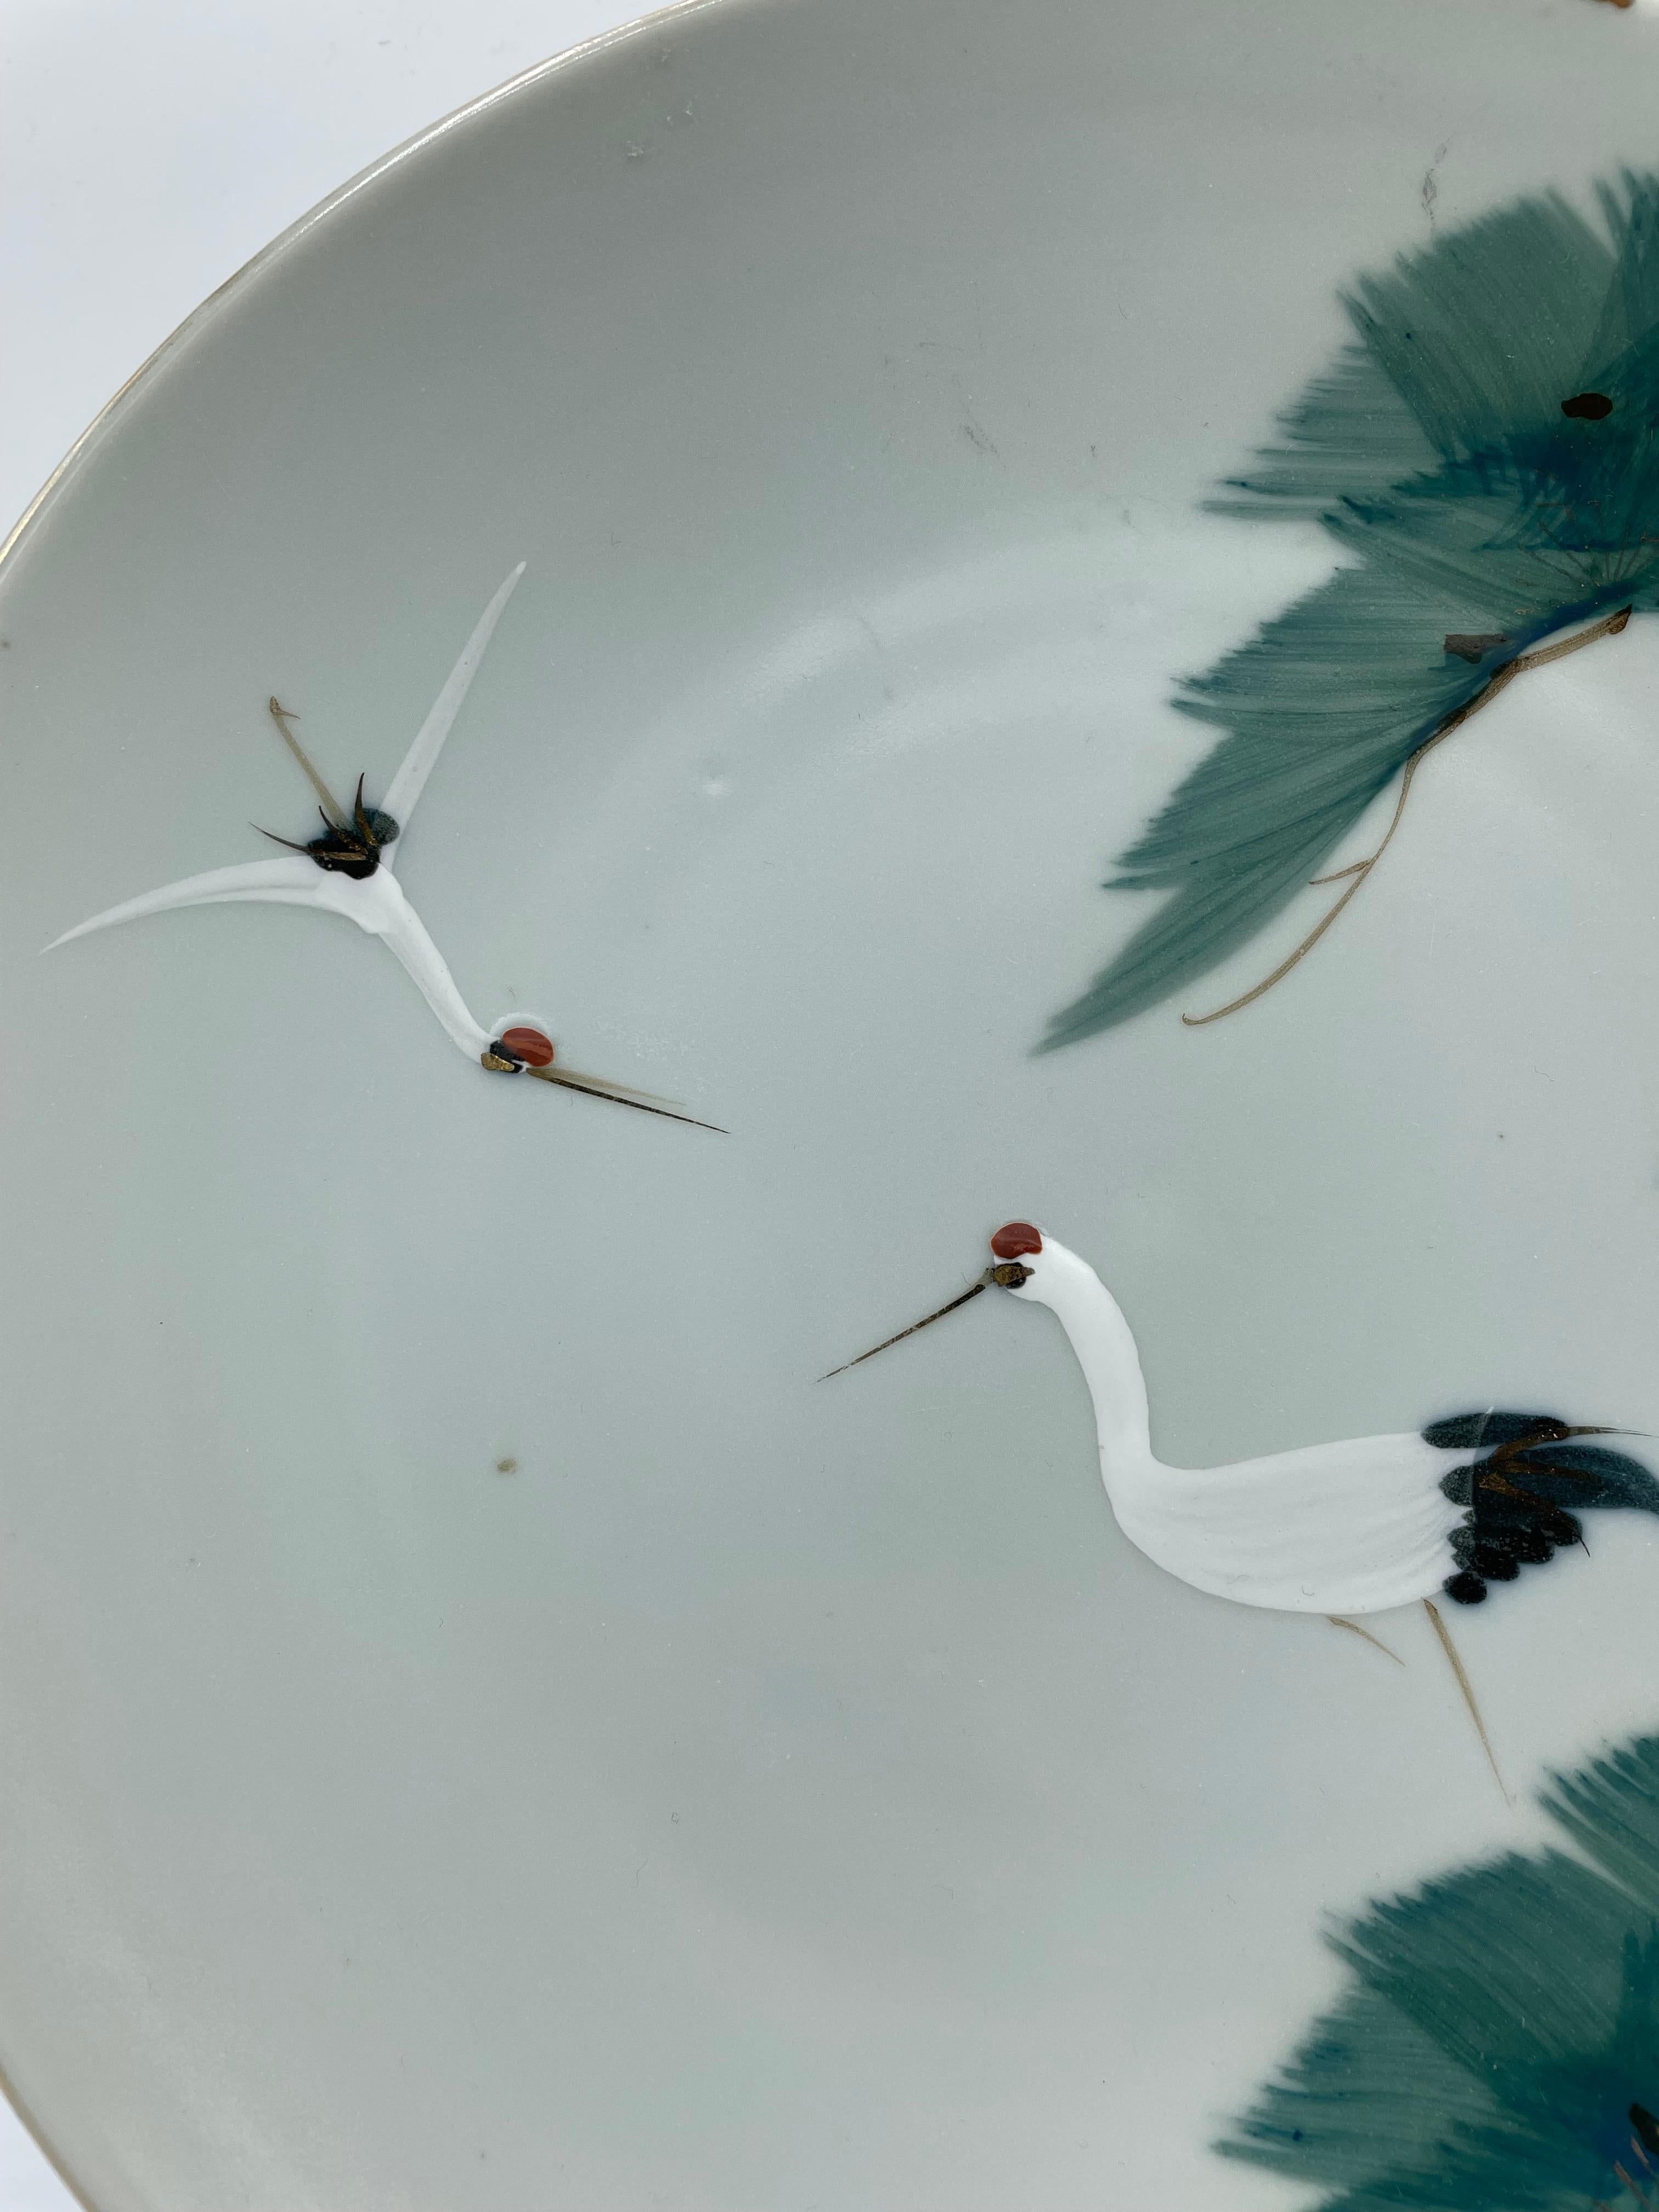 This is an antique plate which was made around 1960s in Showa era.
This plate is hand painted. It is made in Japan.
There is two cranes on this plate.
Two cranes walking or flying together is the ultimate symbol of longevity. Since cranes fly in